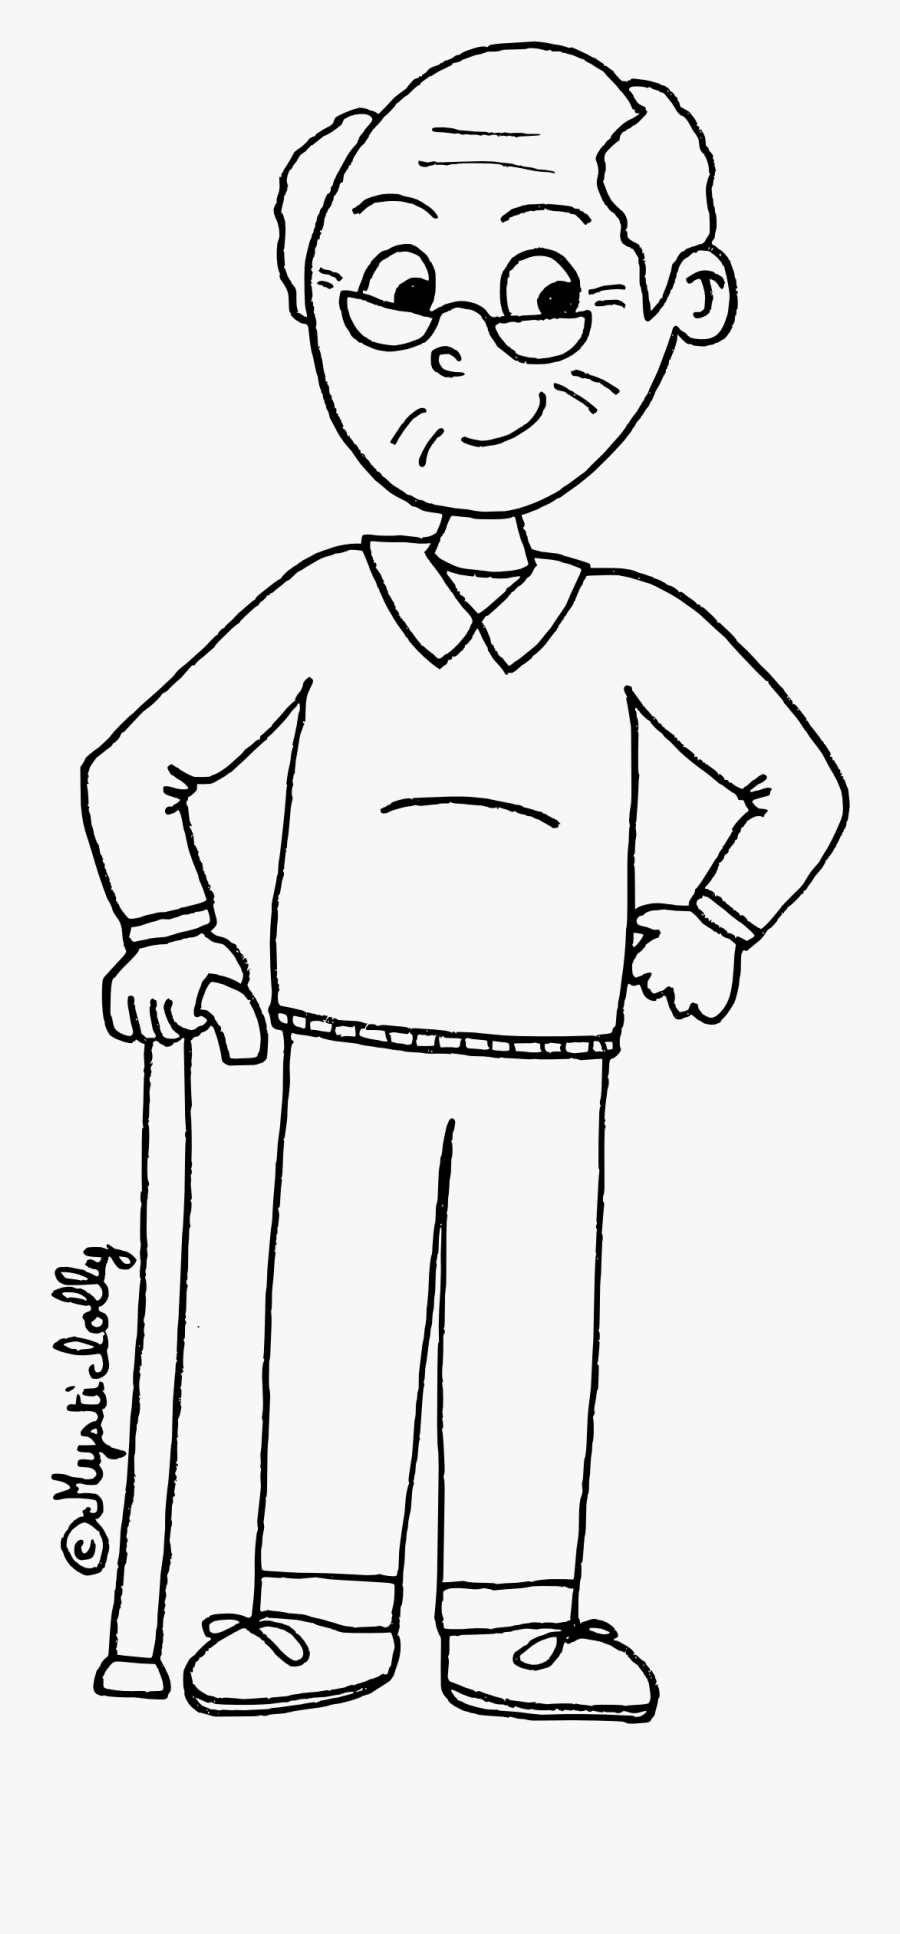 Grandfather Clipart Black And White, Transparent Clipart